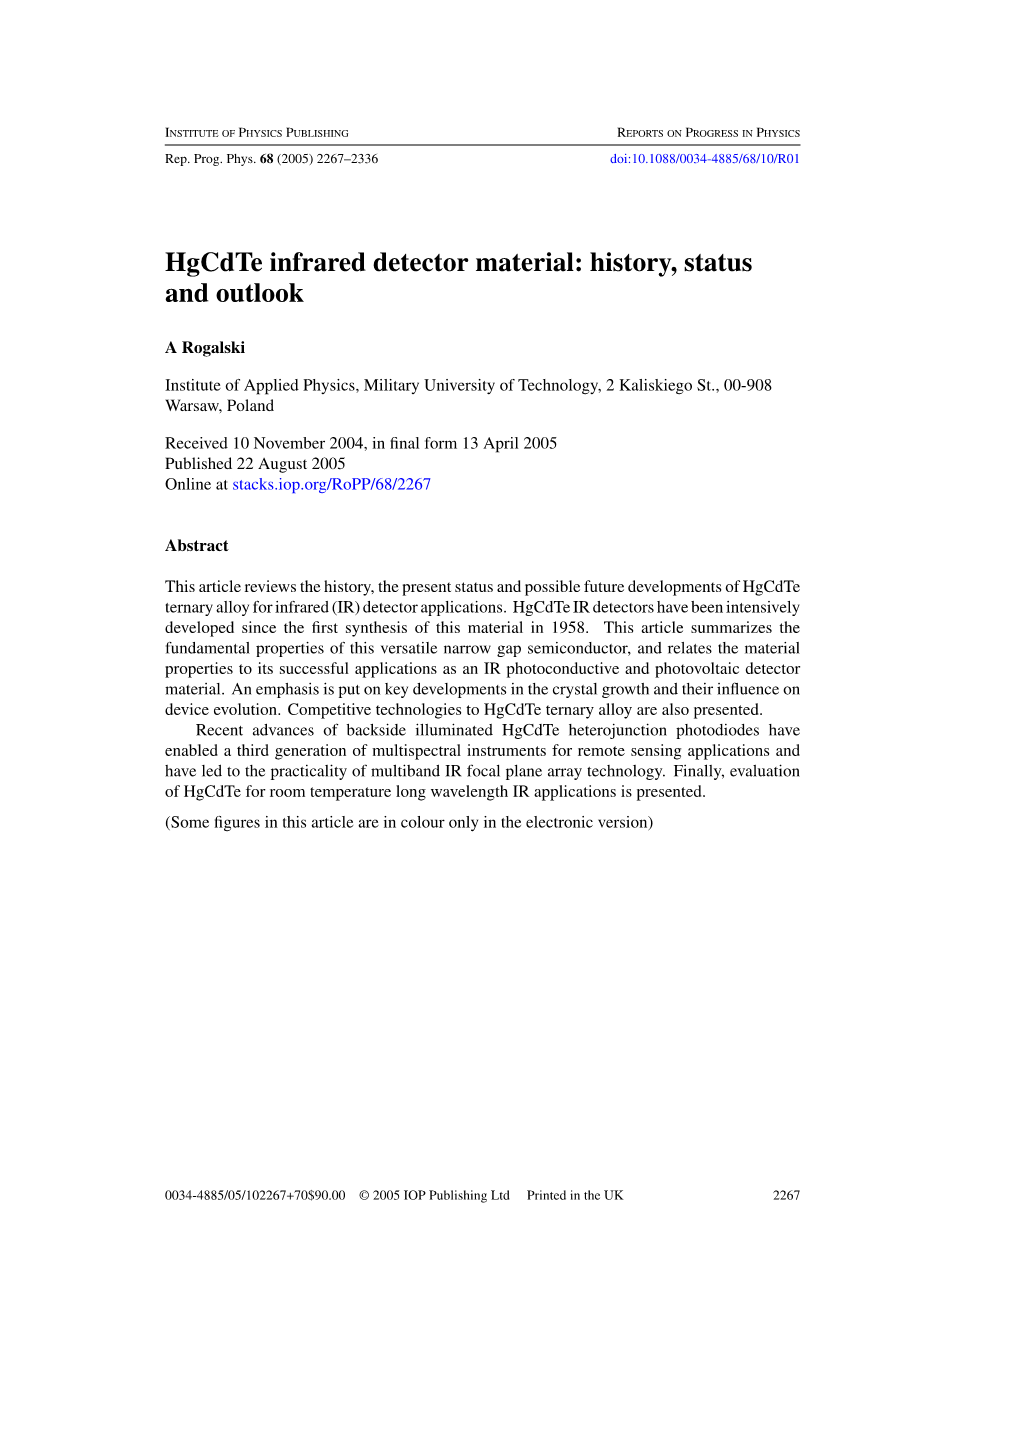 Hgcdte Infrared Detector Material: History, Status and Outlook